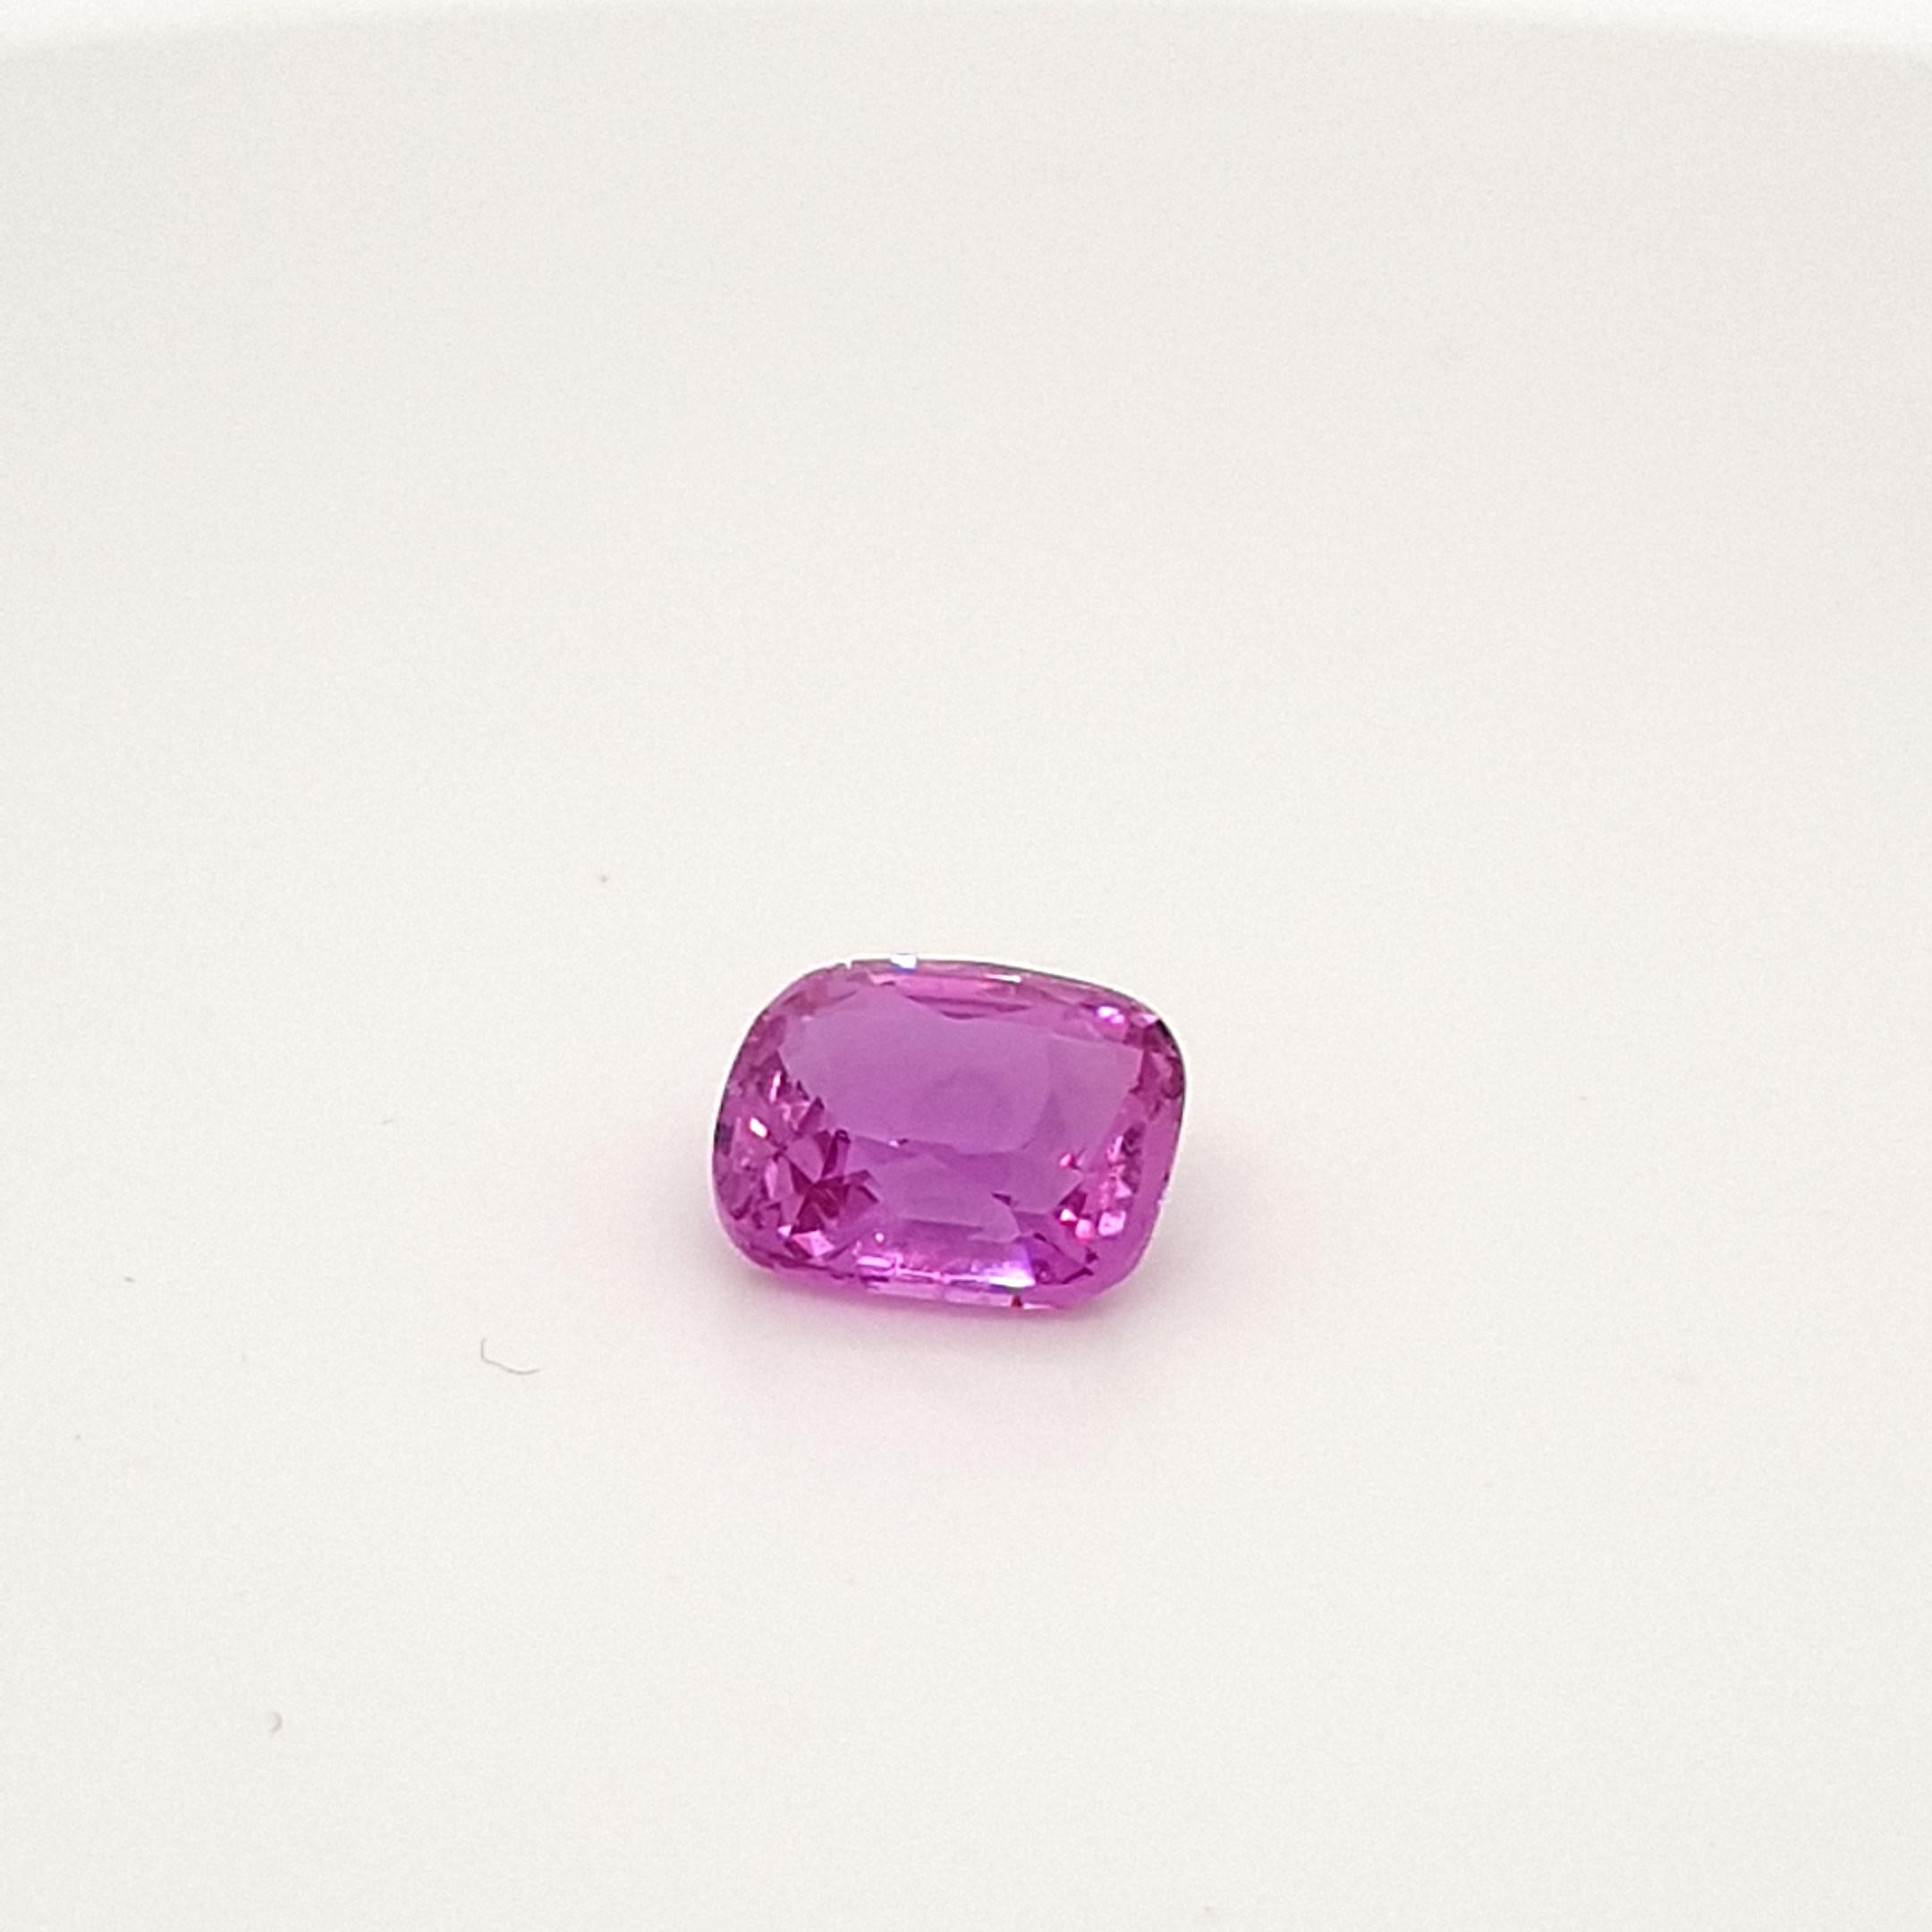 Pink Violet Sapphire, Faceted Gem, 3, 04 Ct., Loose Gemstone, no treatments For Sale 4